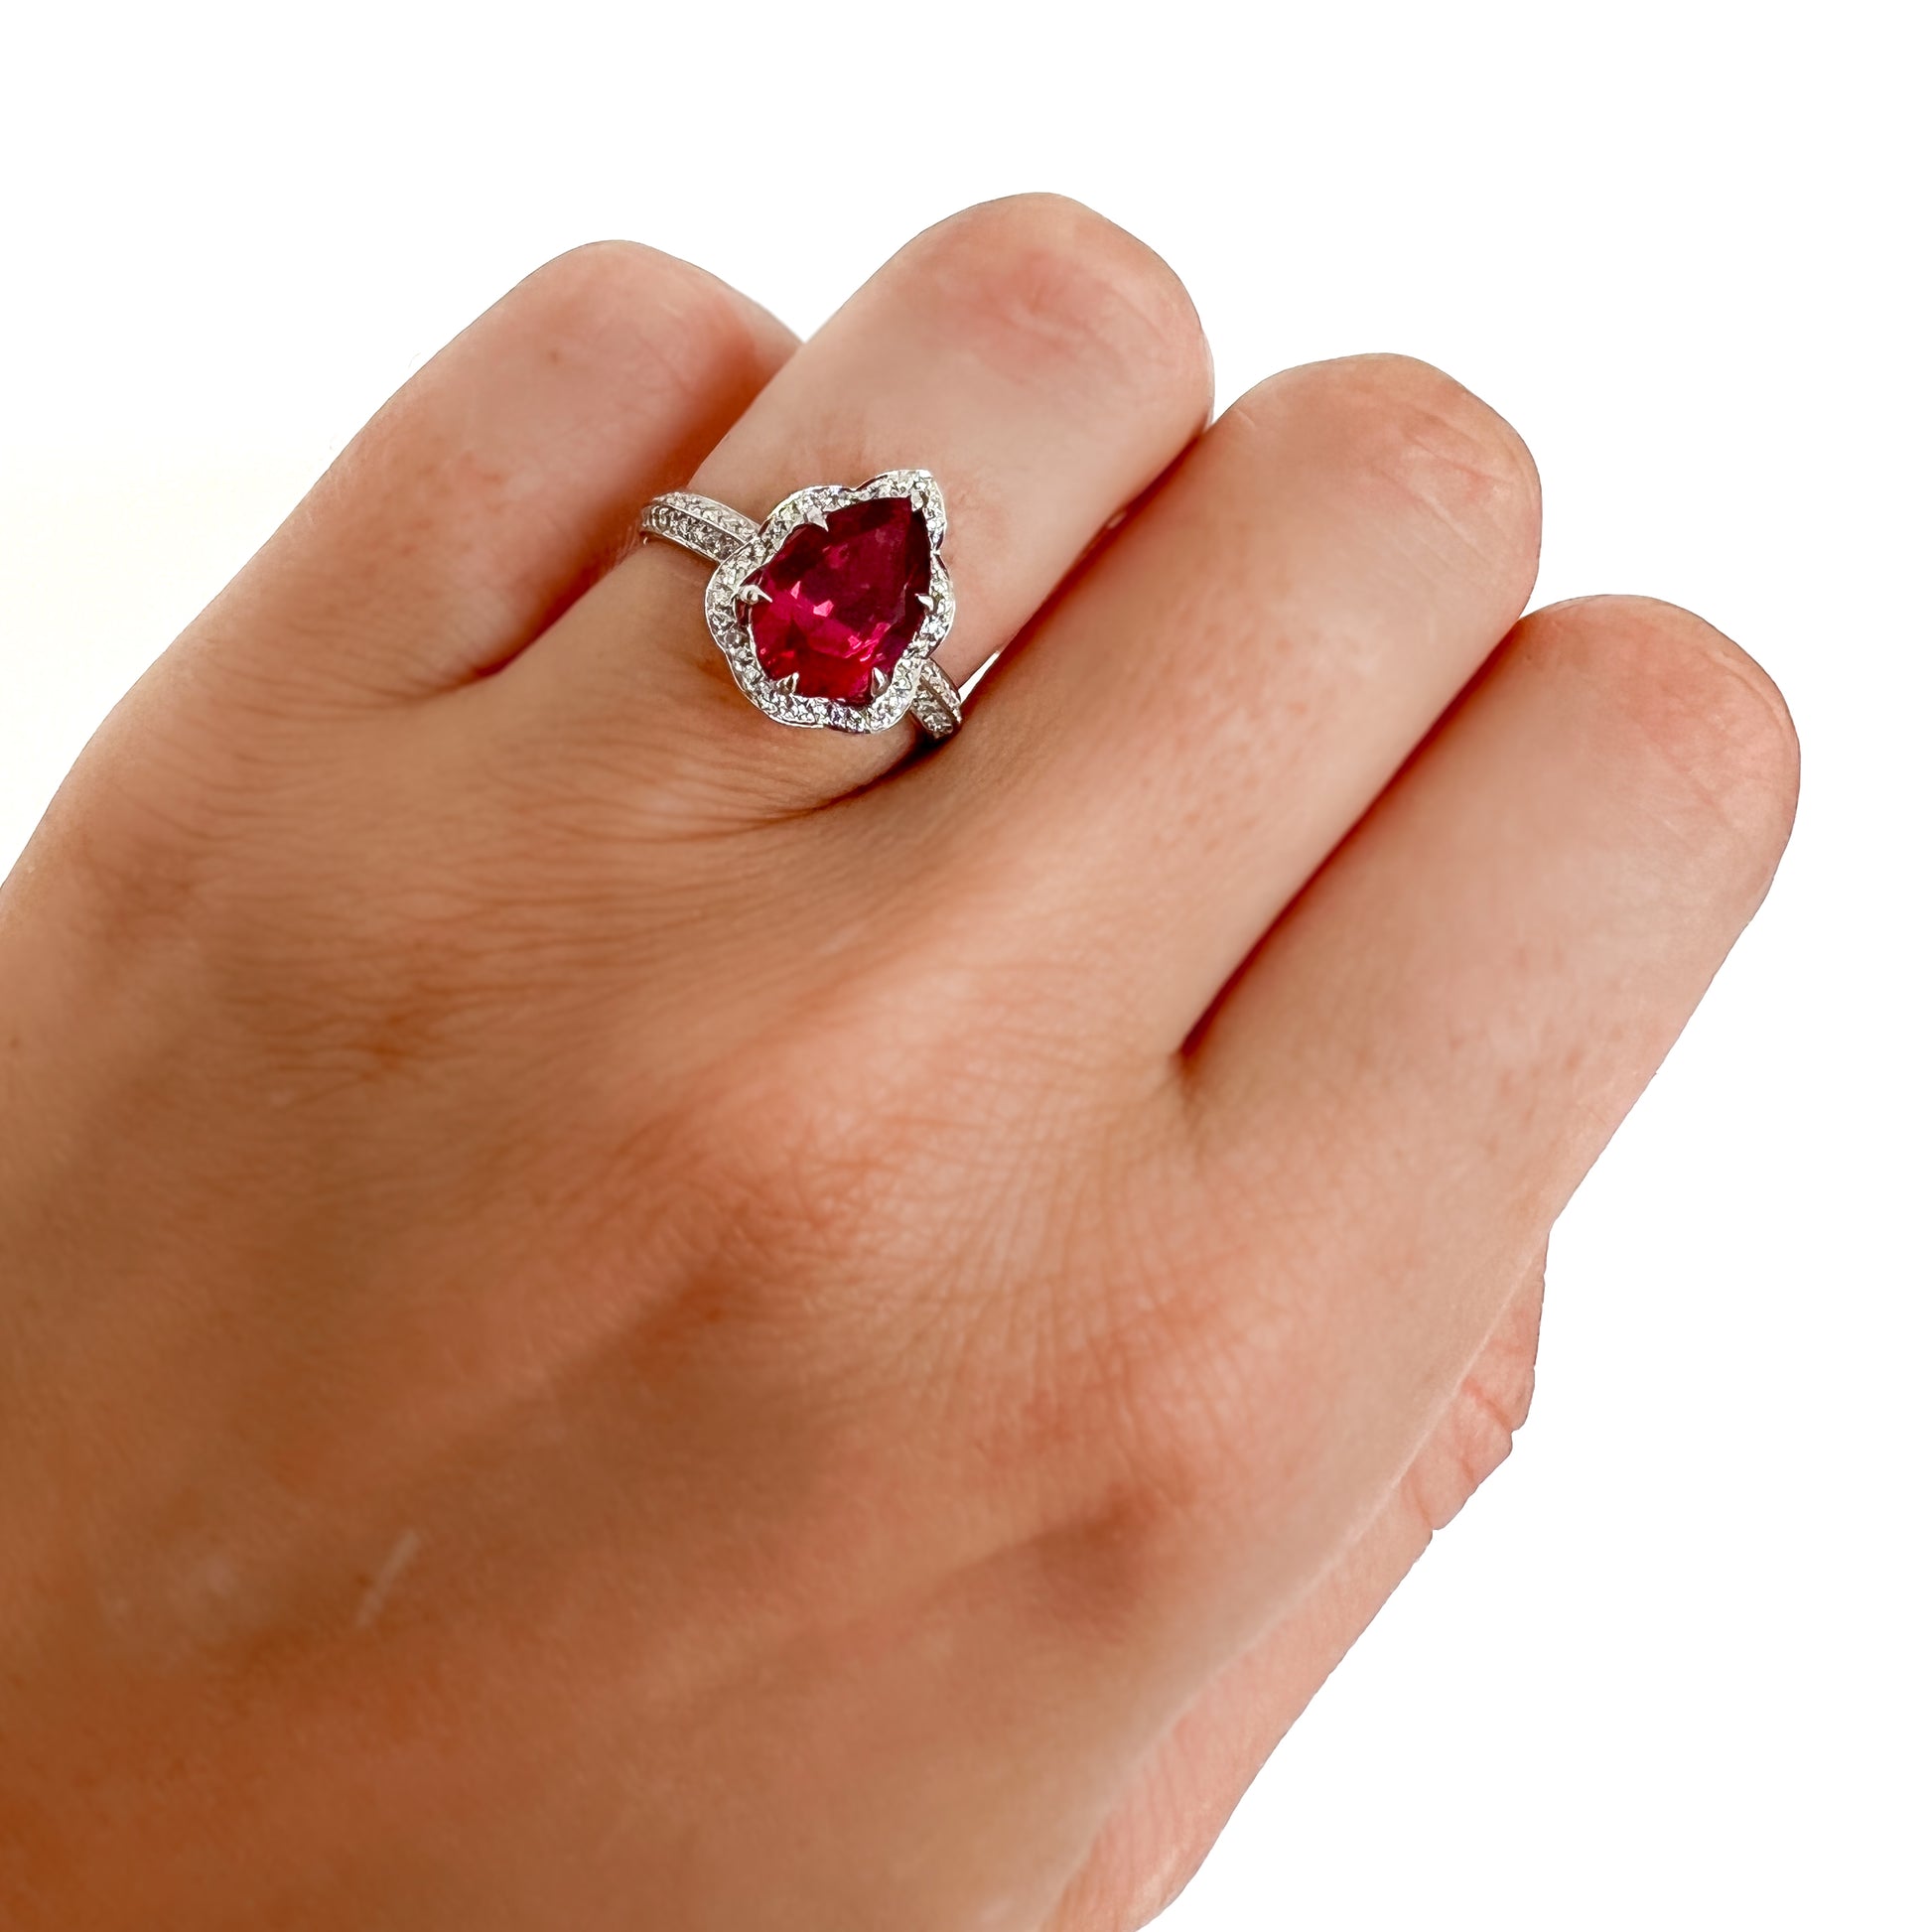 GIA Certified Red Spinel ring. 红色尖晶石和钻石戒指 香港. Spinel and diamond ring Hong Kong USA by Valentina Fine Jewellery